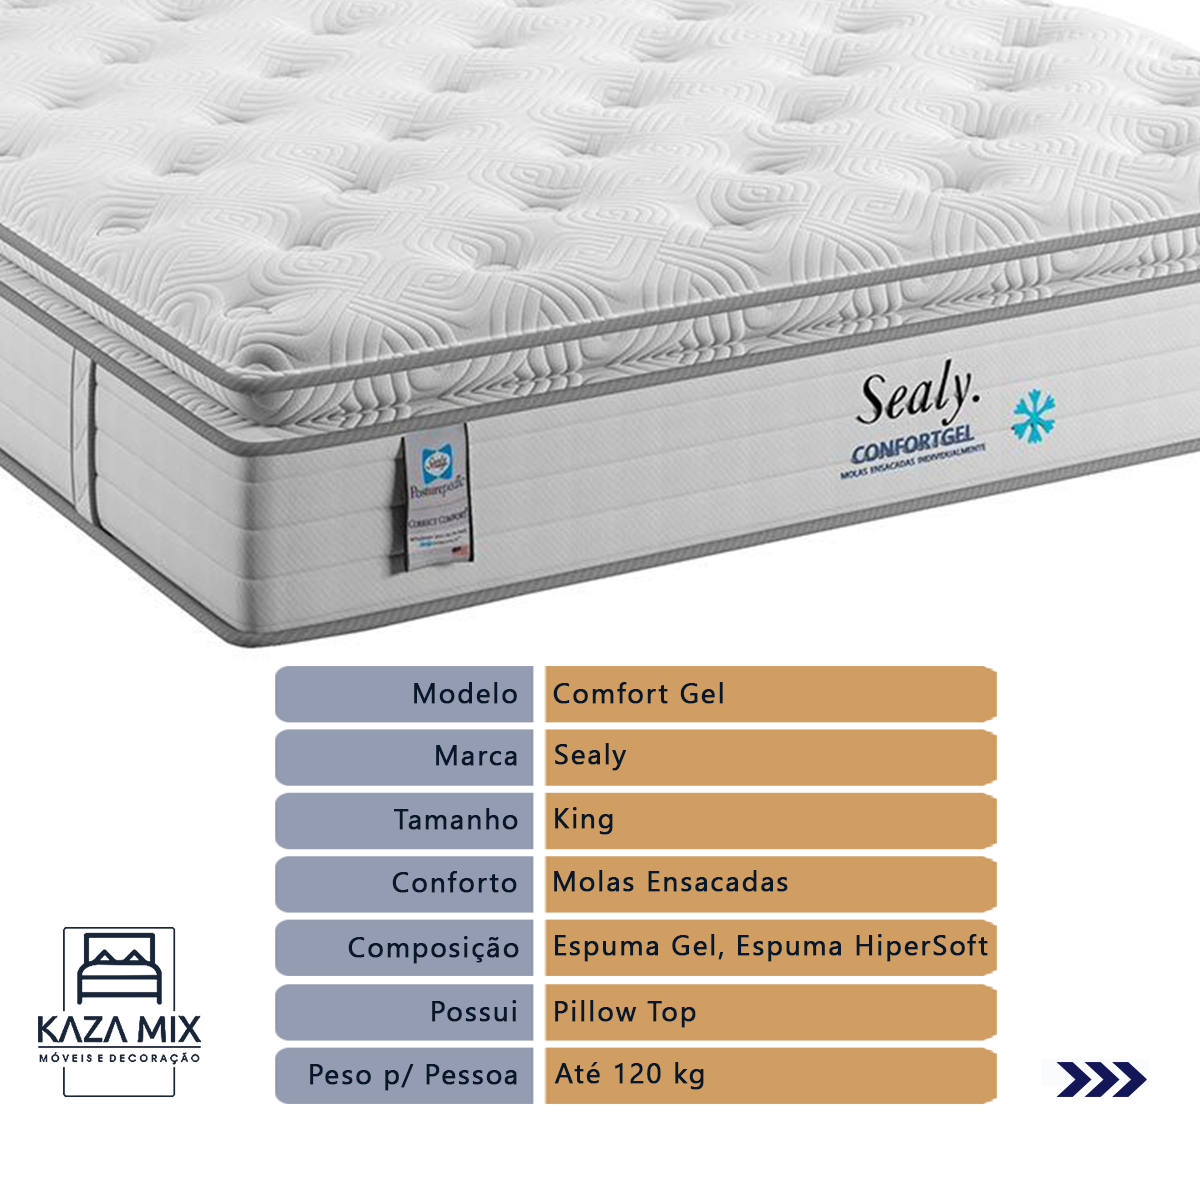 Sealy Comfort Gel Hipersoft e Box Marrom King Size - 2